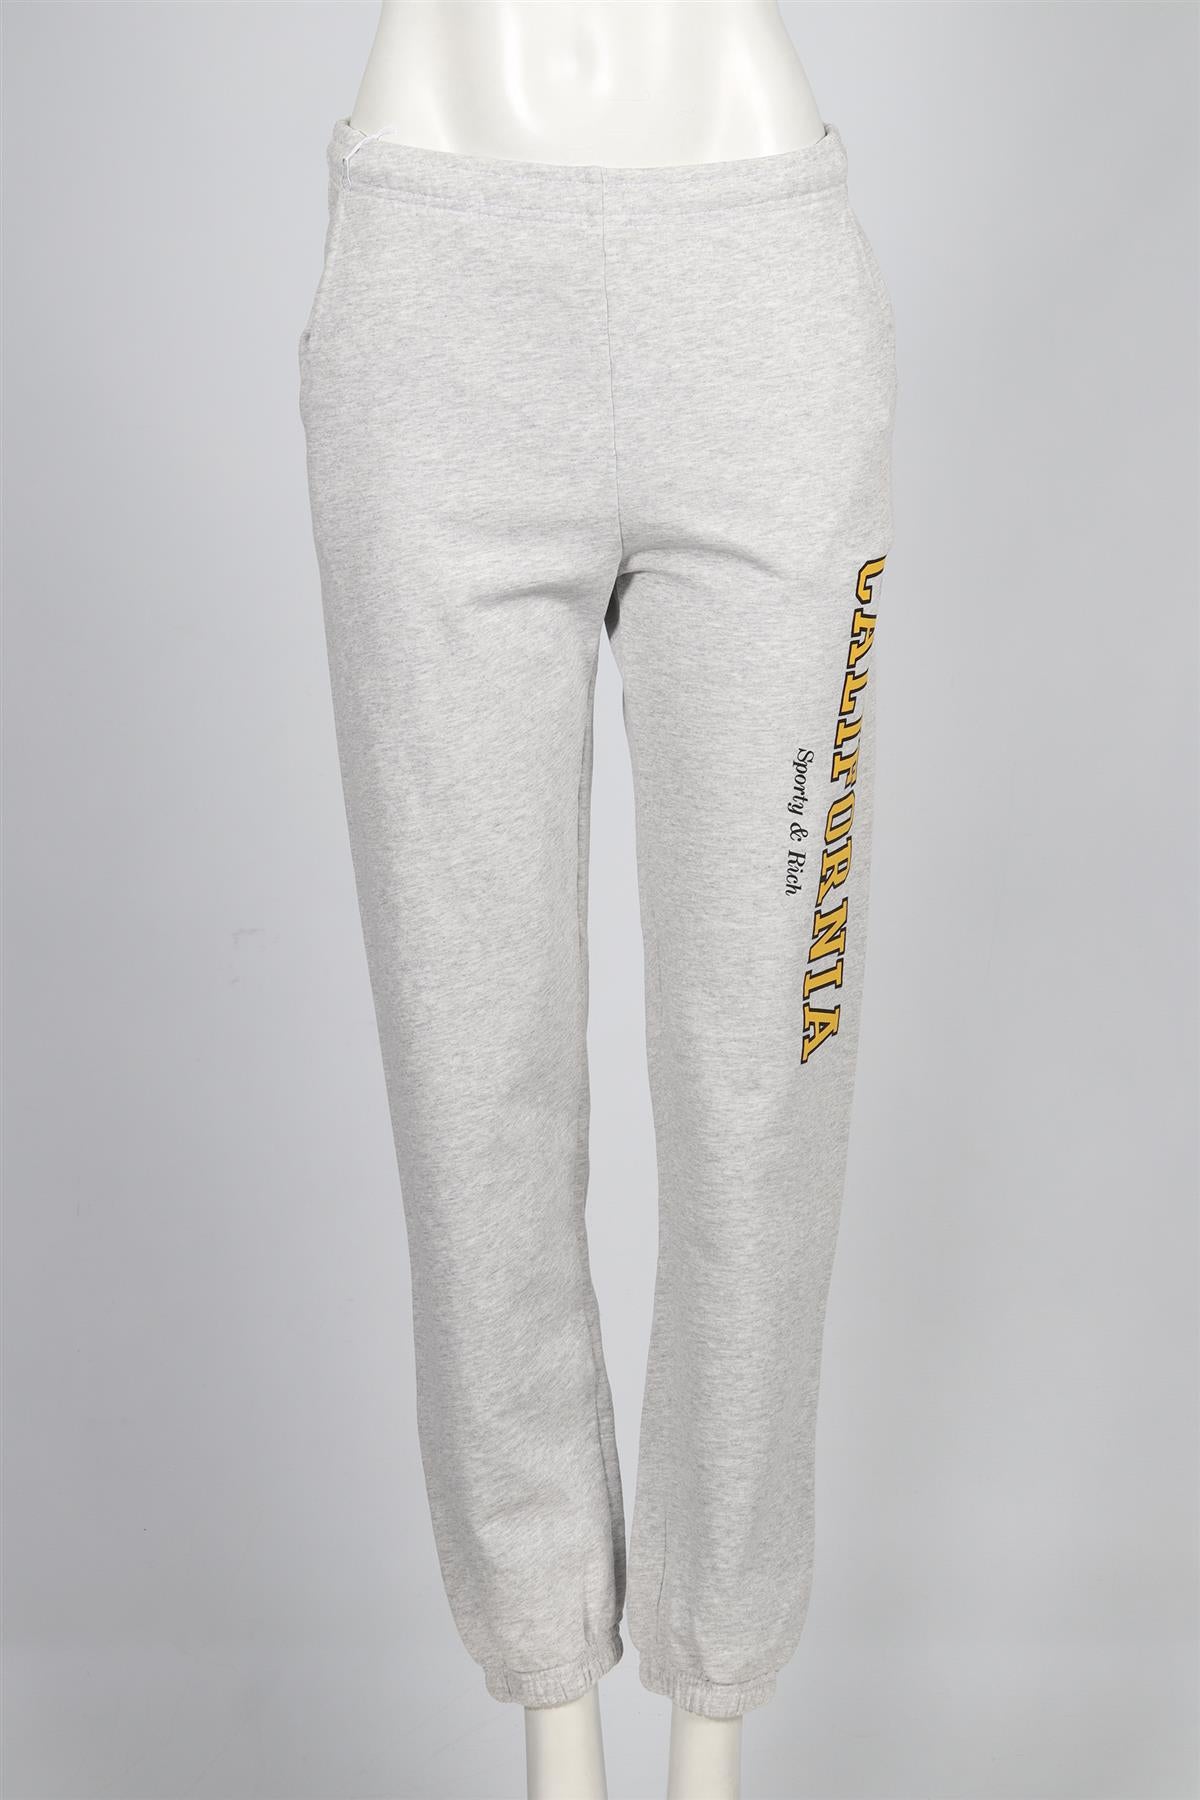 SPORTY & RICH COTTON BLEND TRACK PANTS SMALL